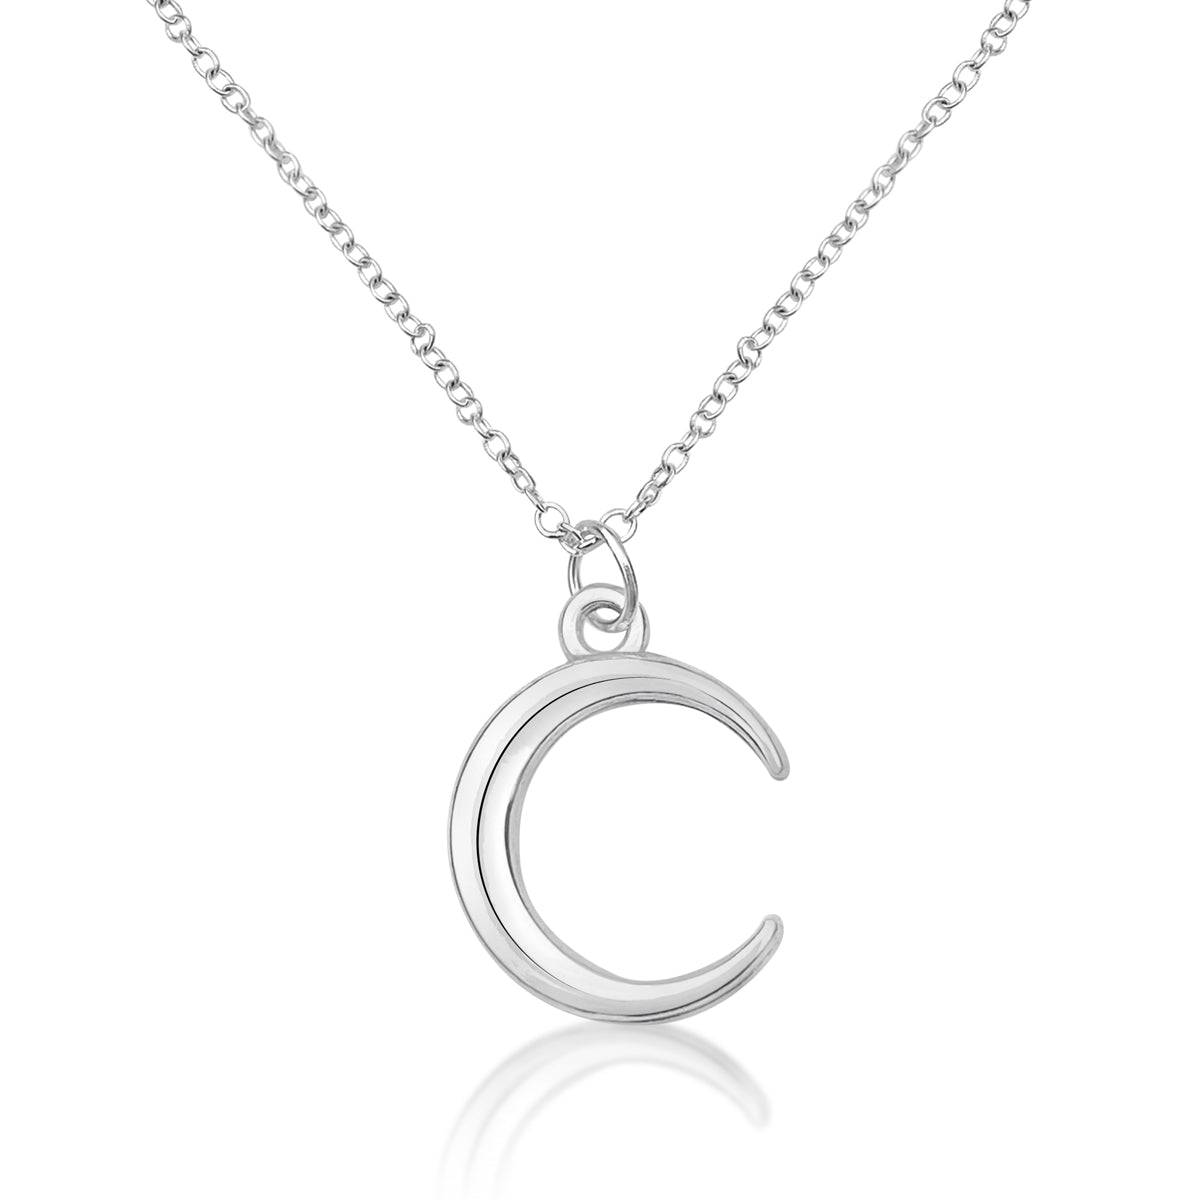 Crescent Moon Charm Necklace - Lunar Energy for Healing